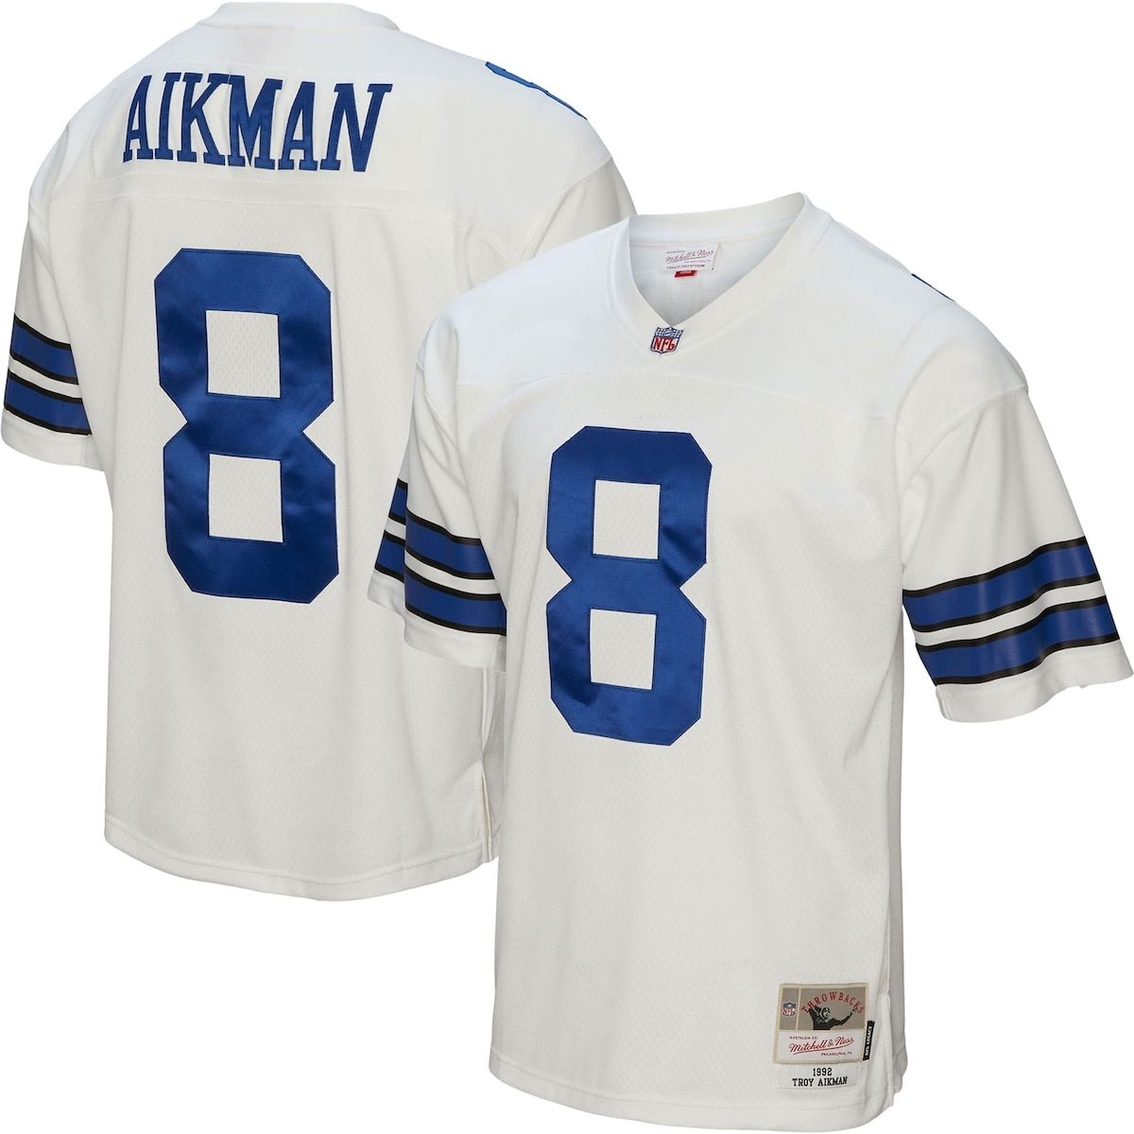 Mitchell & Ness Men's Troy Aikman White Dallas Cowboys Legacy Replica Jersey - Image 2 of 4